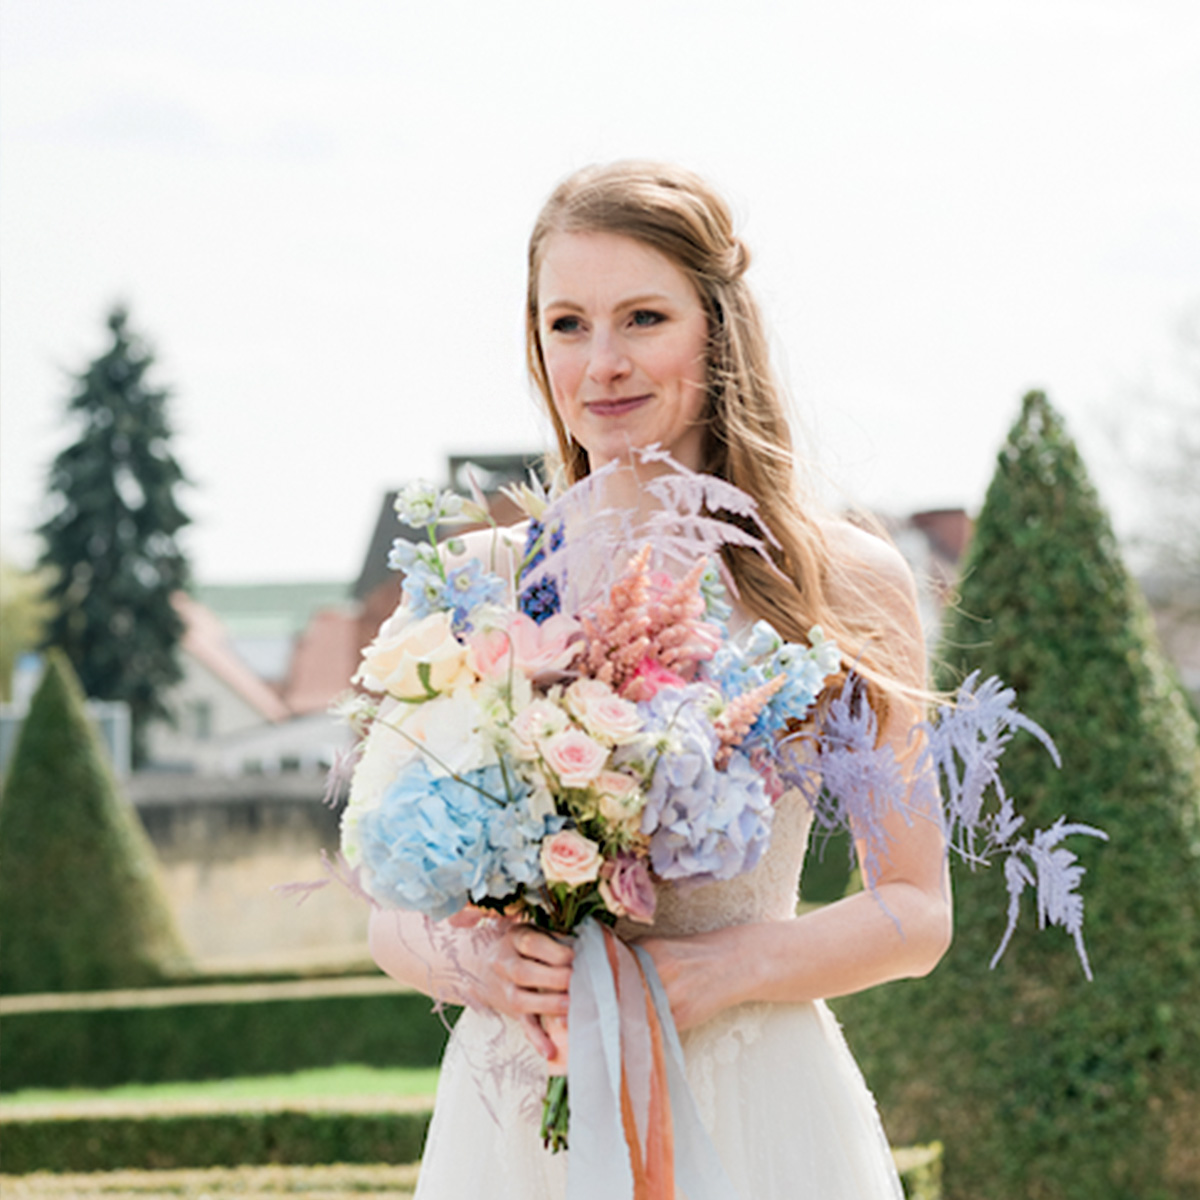 The Sweetest Weddings Are Pastel-Colored feature on Thursd